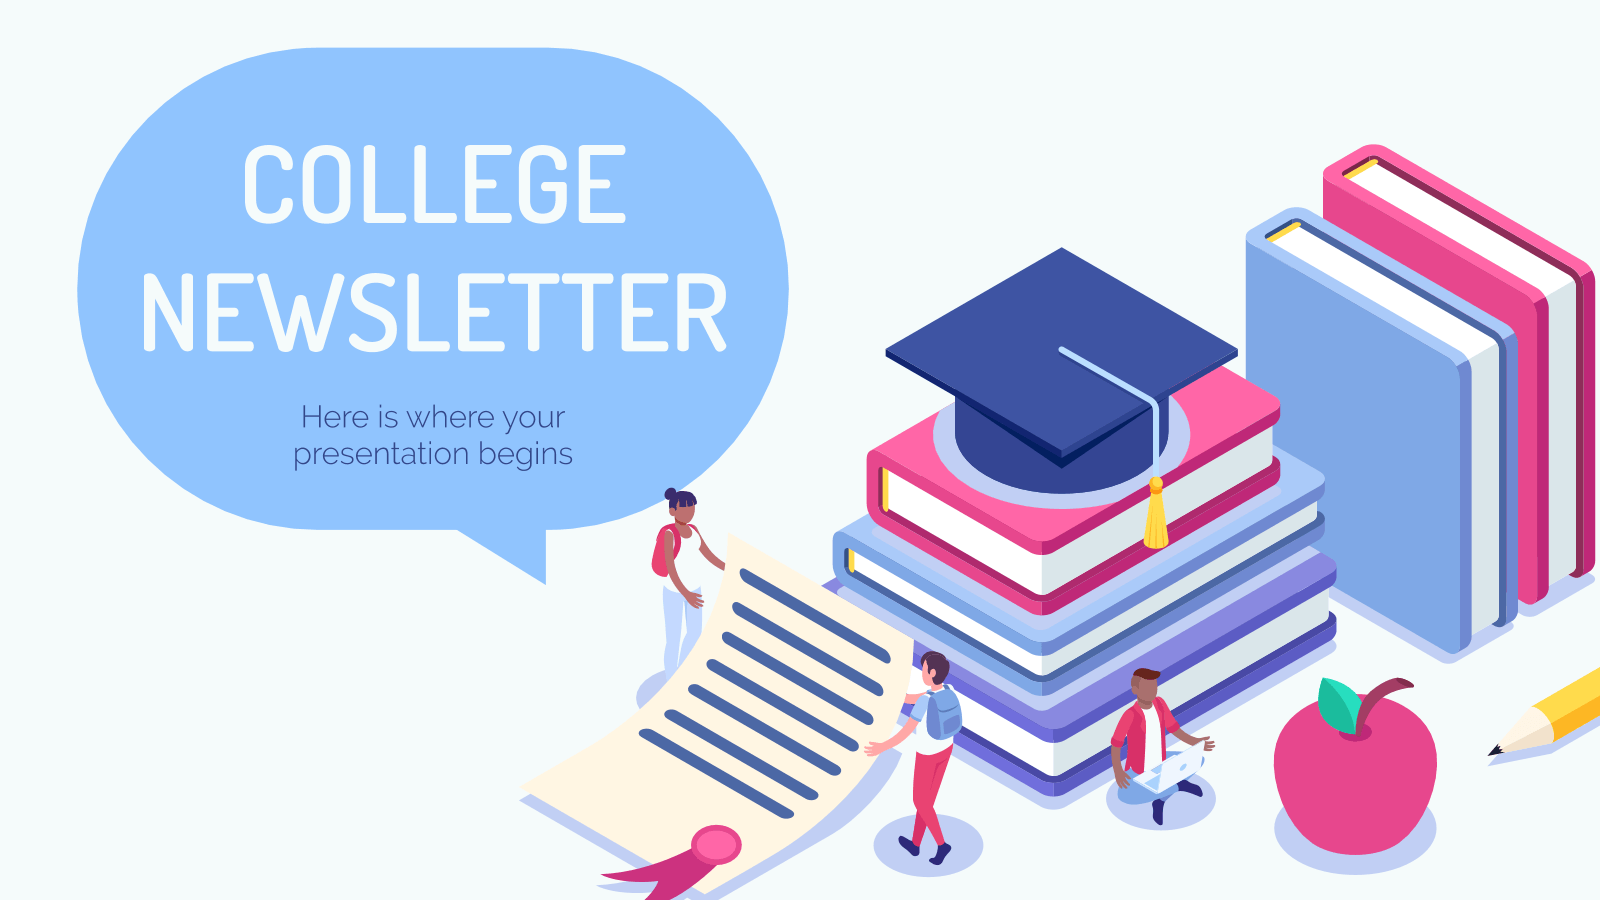 College Newsletter Powerpoint Template